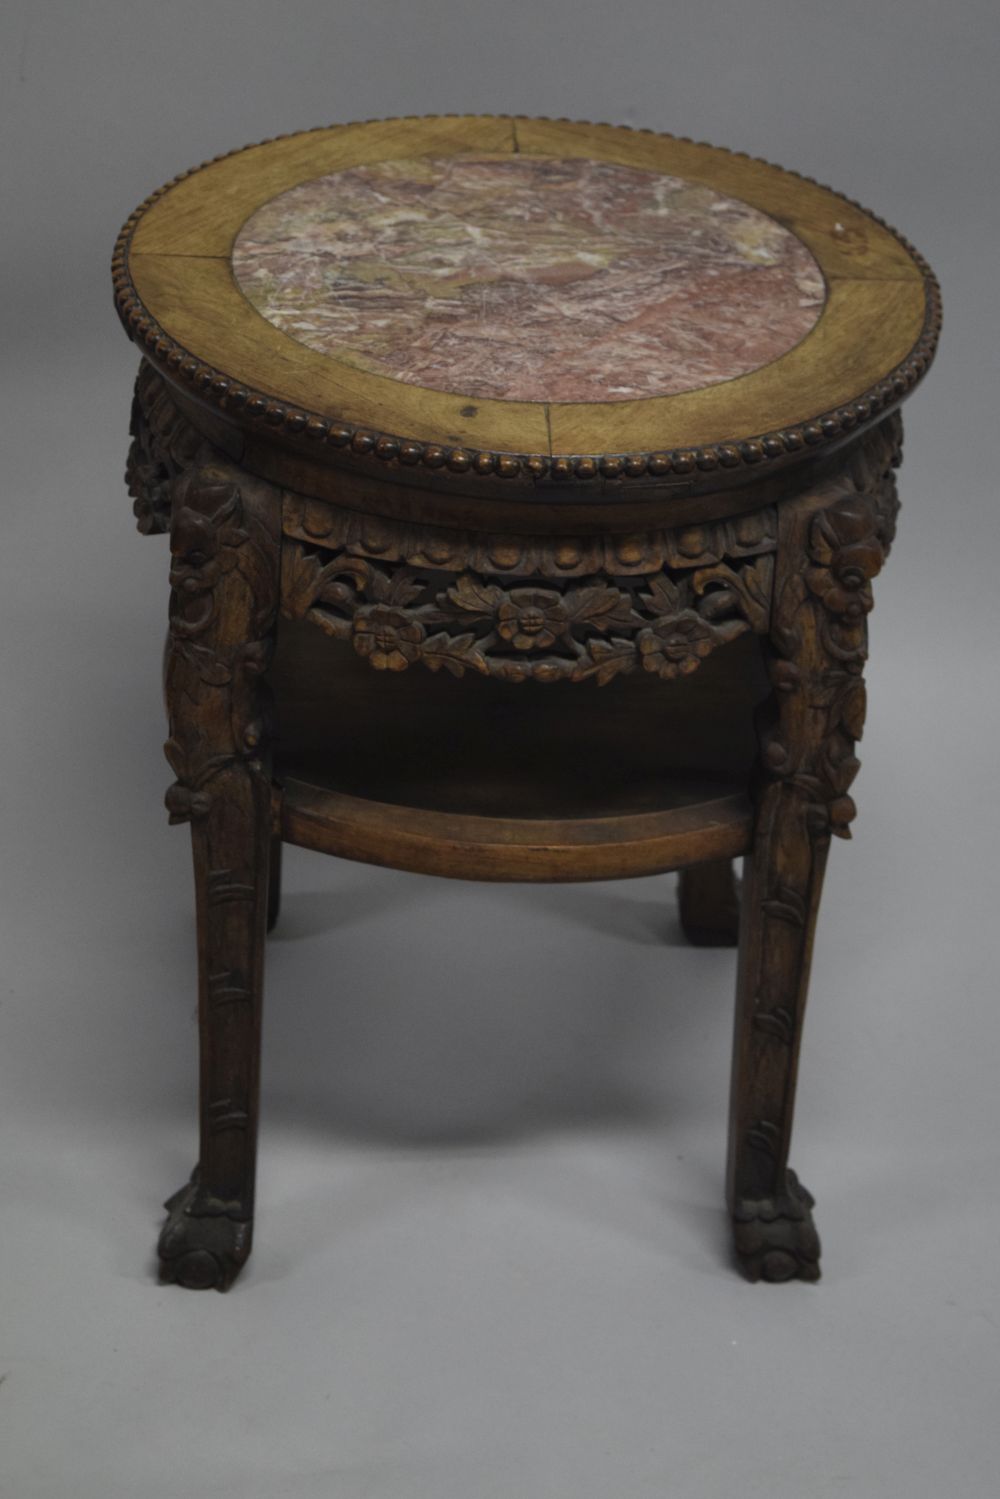 A CHINESE CARVED HARDWOOD MARBLE TOP STAND, the frieze and legs carved with foliate decoration, - Image 4 of 6